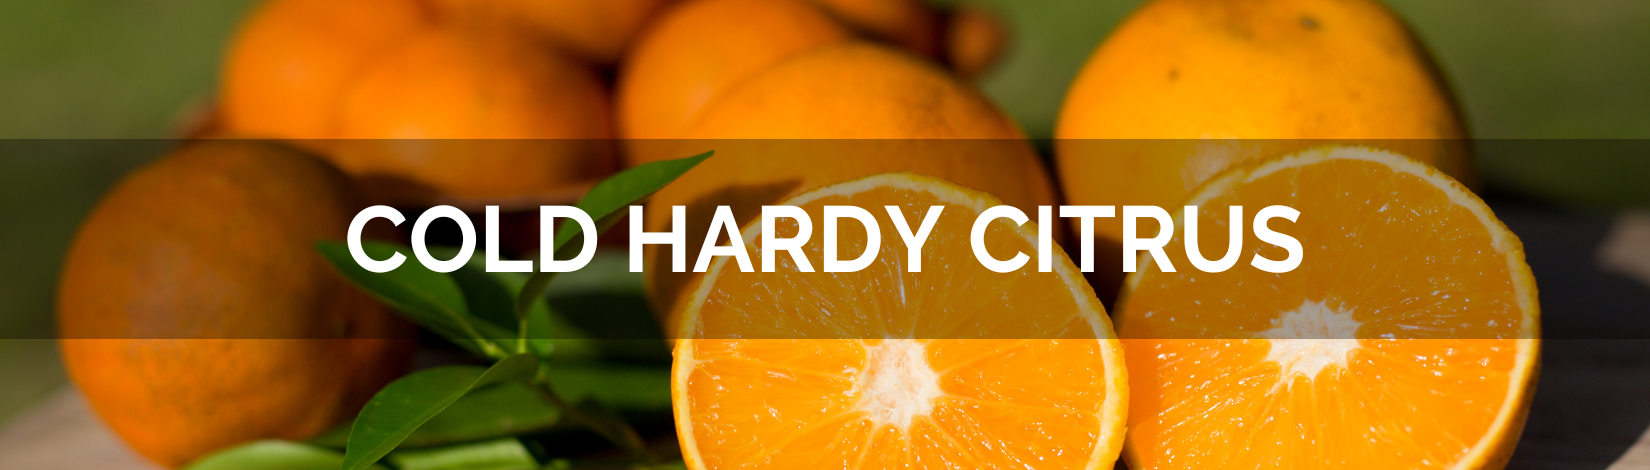 Banner - cold hardy citrus